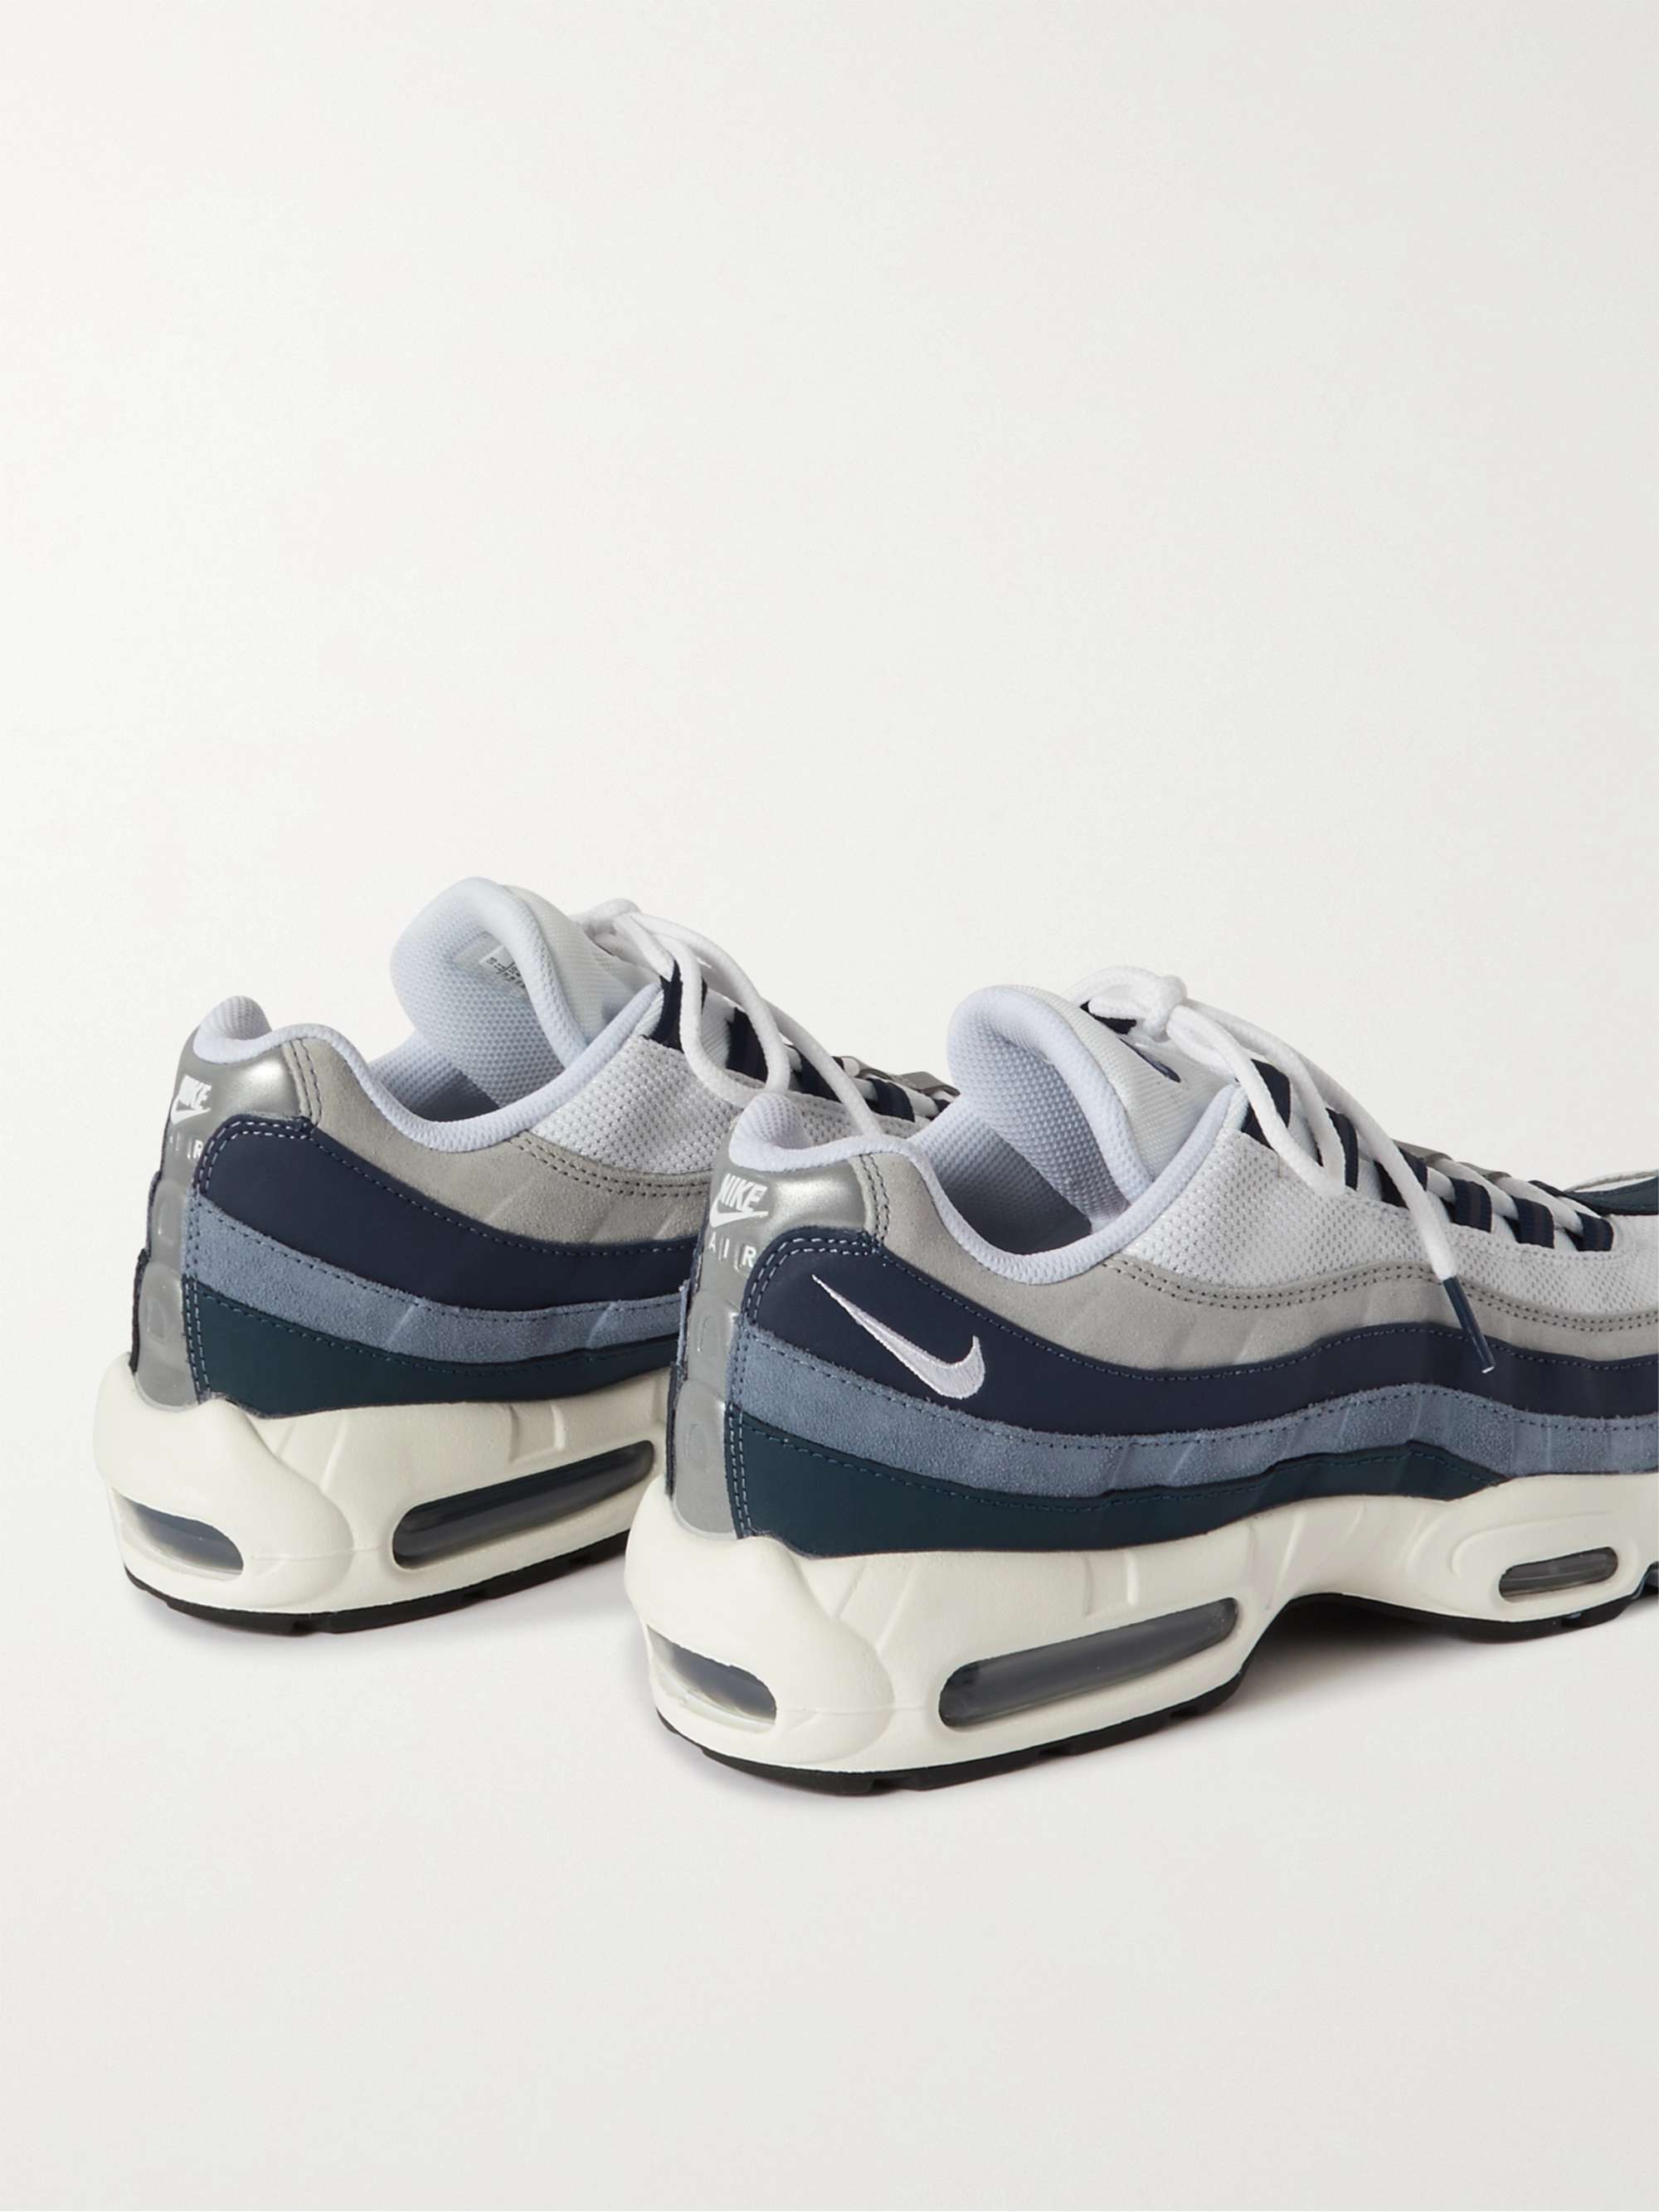 NIKE Air Max 95 Panelled Leather, Suede and Mesh Sneakers